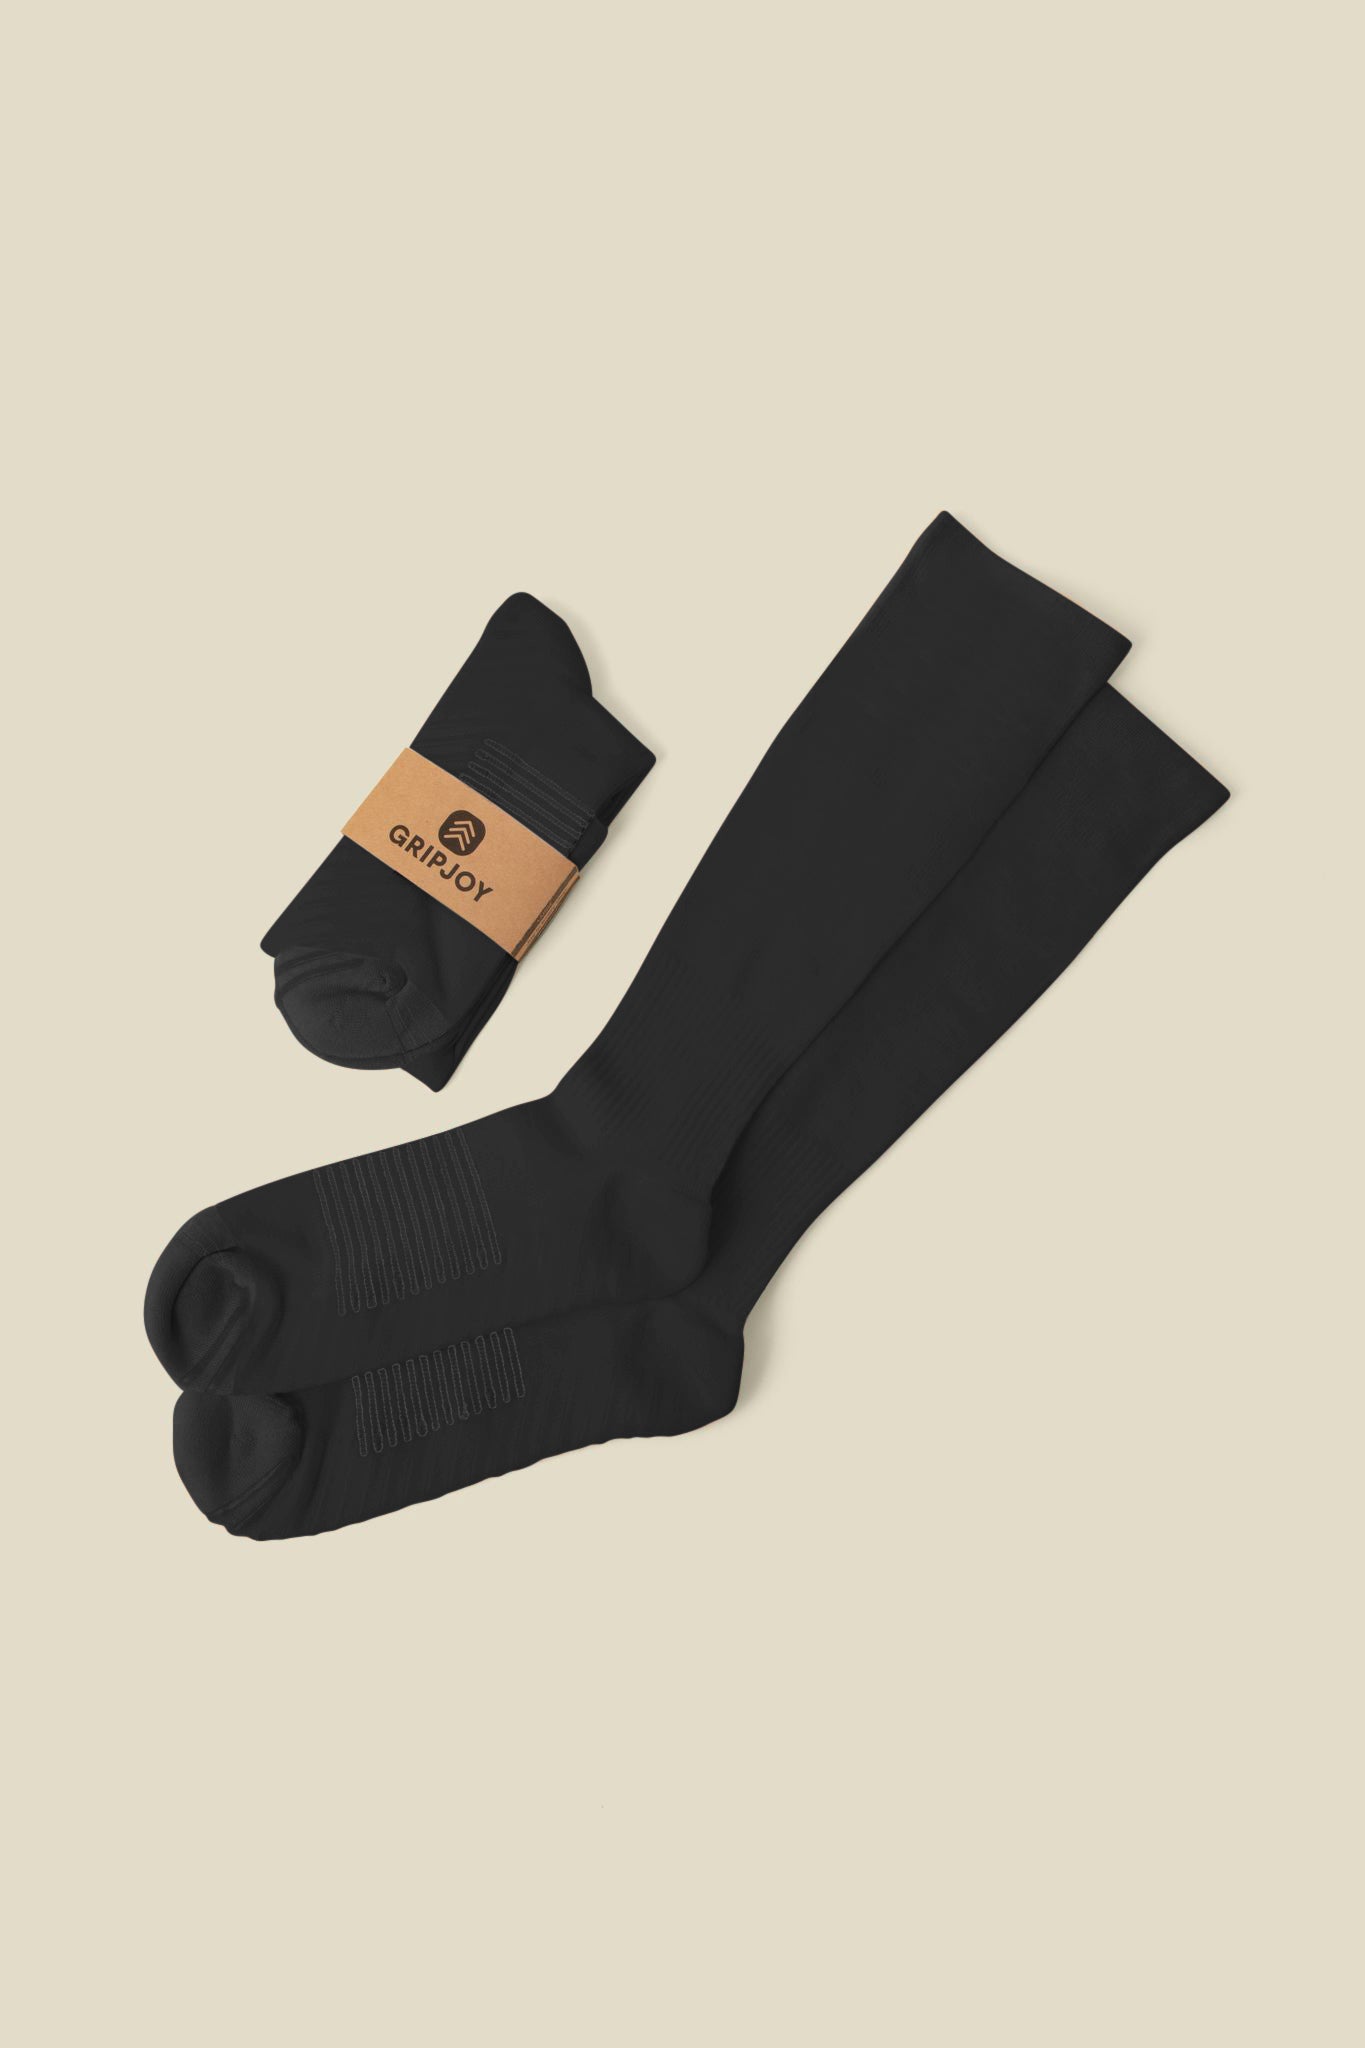 Men's Black Compression Socks with Grips - 2 Pairs - Gripjoy Socks